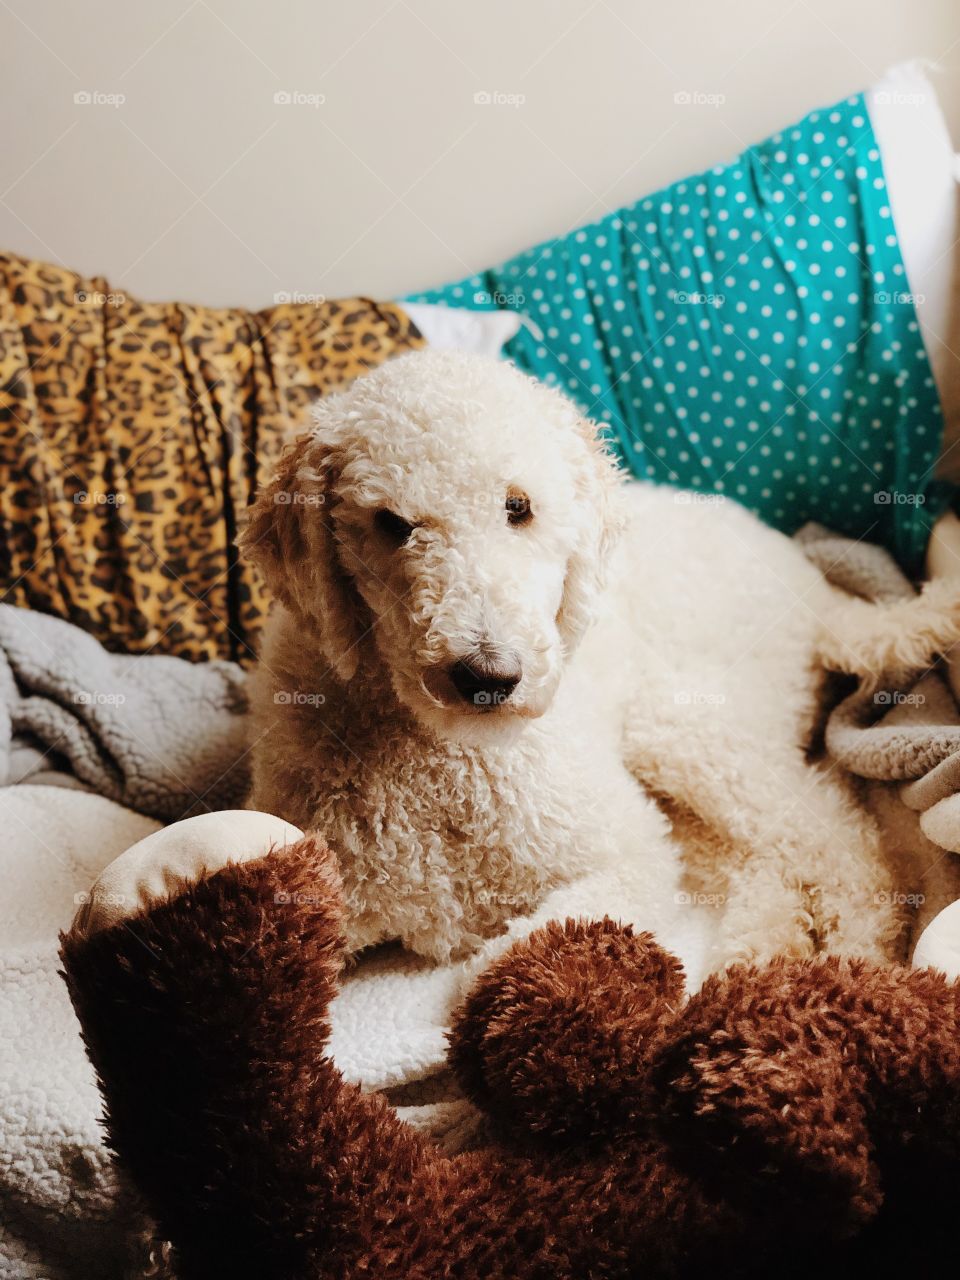 Goldendoodle dog lying on bed with pillows 